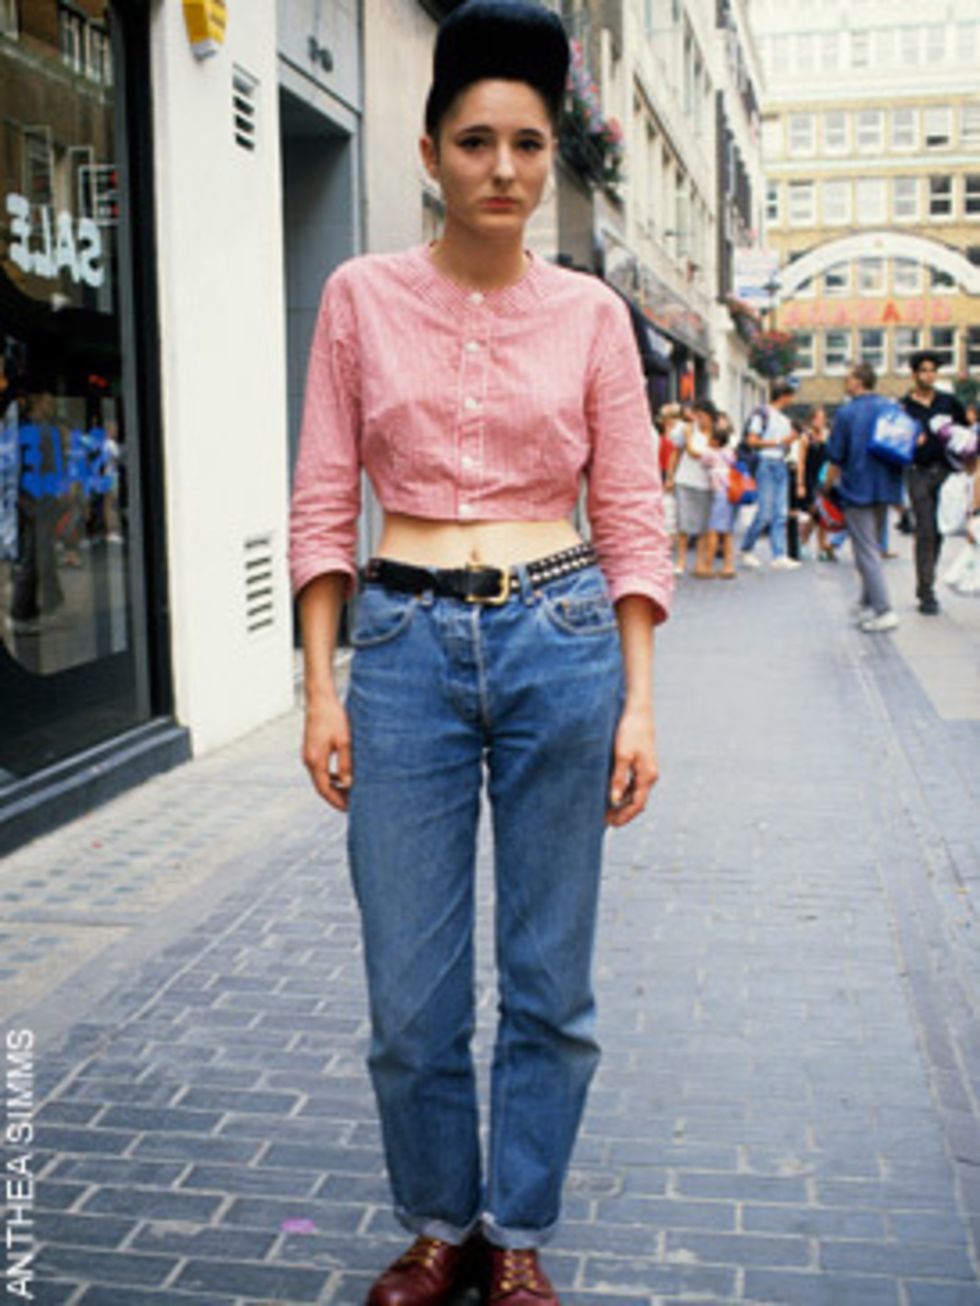 <p>Rolled hem, high waisted<a href="http://www.elleuk.com/starstyle/celebrity-trends/%28section%29/Everyone-s-Wearing-Rolled-up-jeans"> jeans </a>with <a href="http://www.elleuk.com/starstyle/celebrity-trends/%28section%29/Everyone-s-Wearing-DM-Boots">DMs